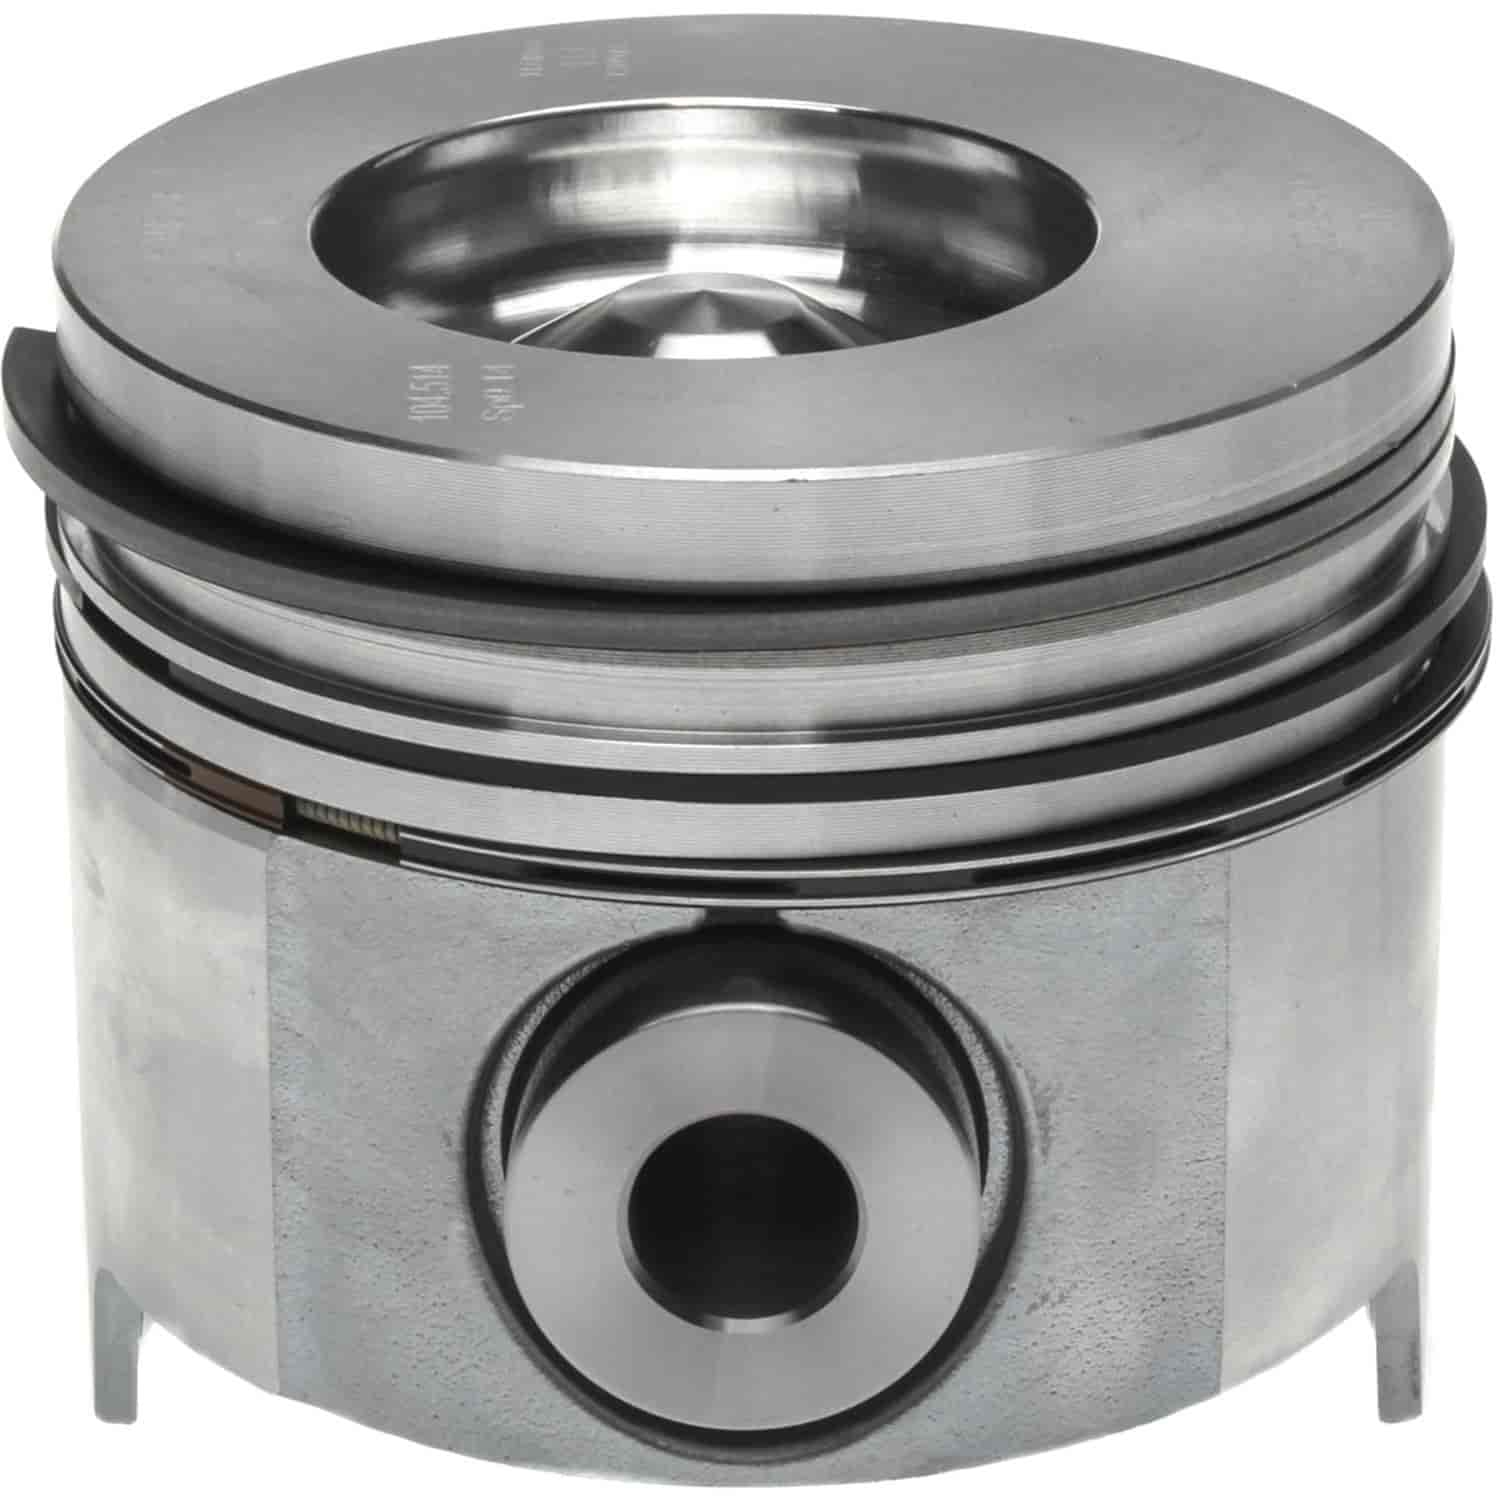 Piston and Rings Set 1994-2003 Ford/Navistar Powerstroke Diesel V8 7.3L with 4.150" Bore (+.040") Reduced Compression